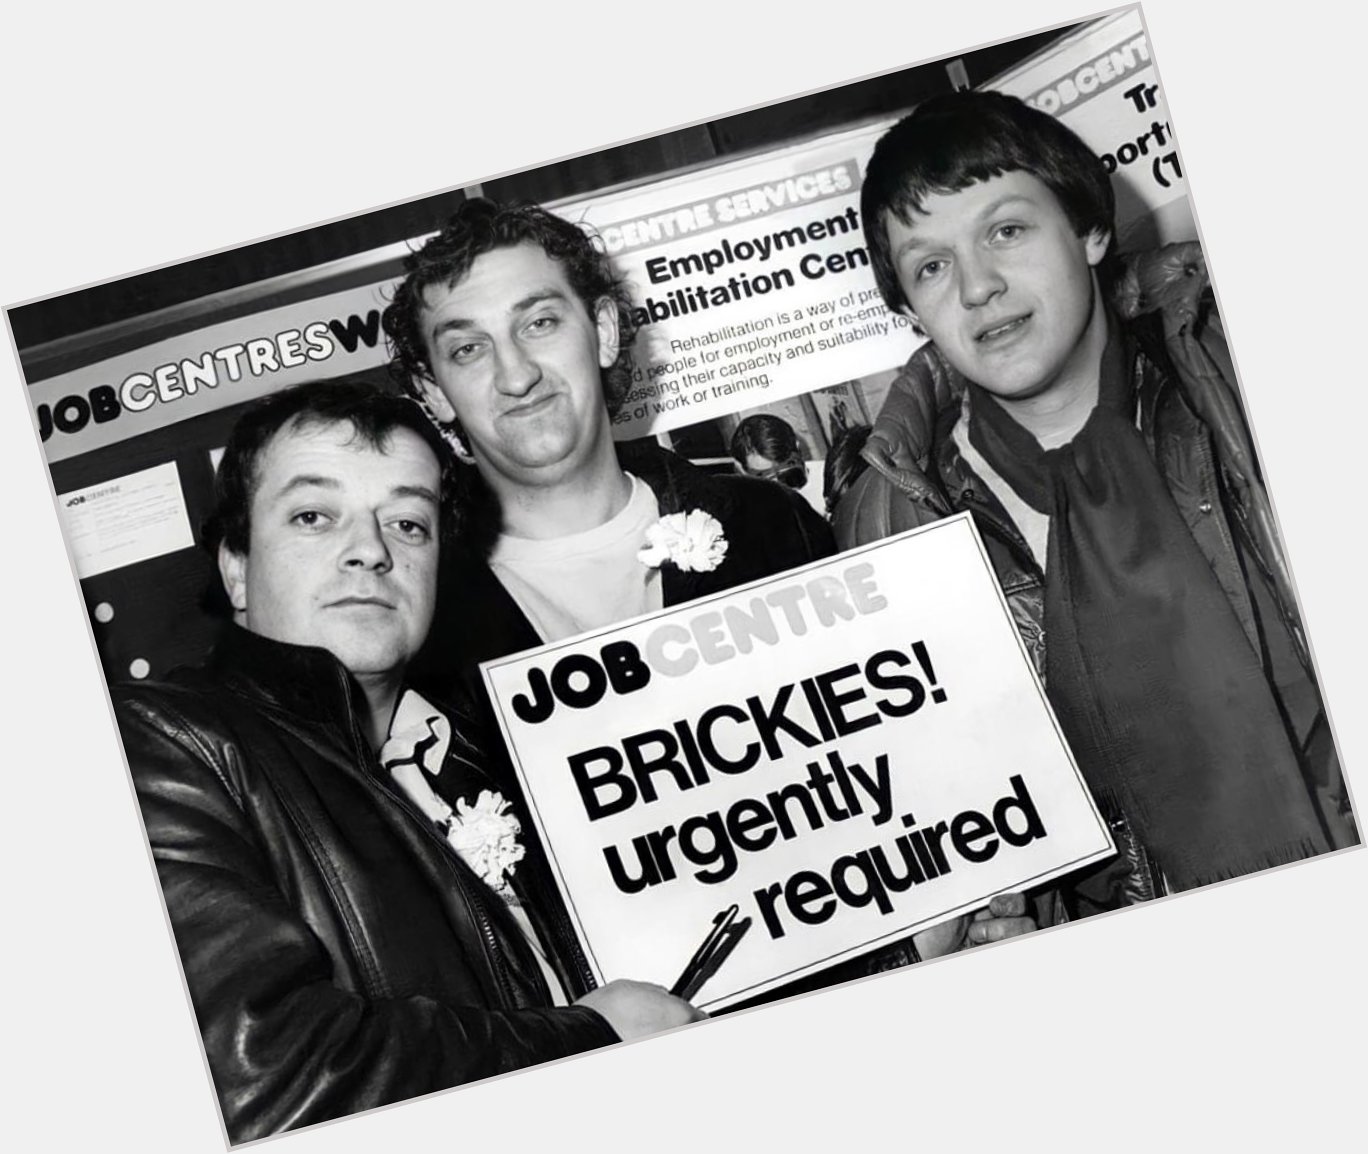 The Legend that is Jimmy Nail (centre) is 68 today! Happy Birthday, Fuckin Live Ya 